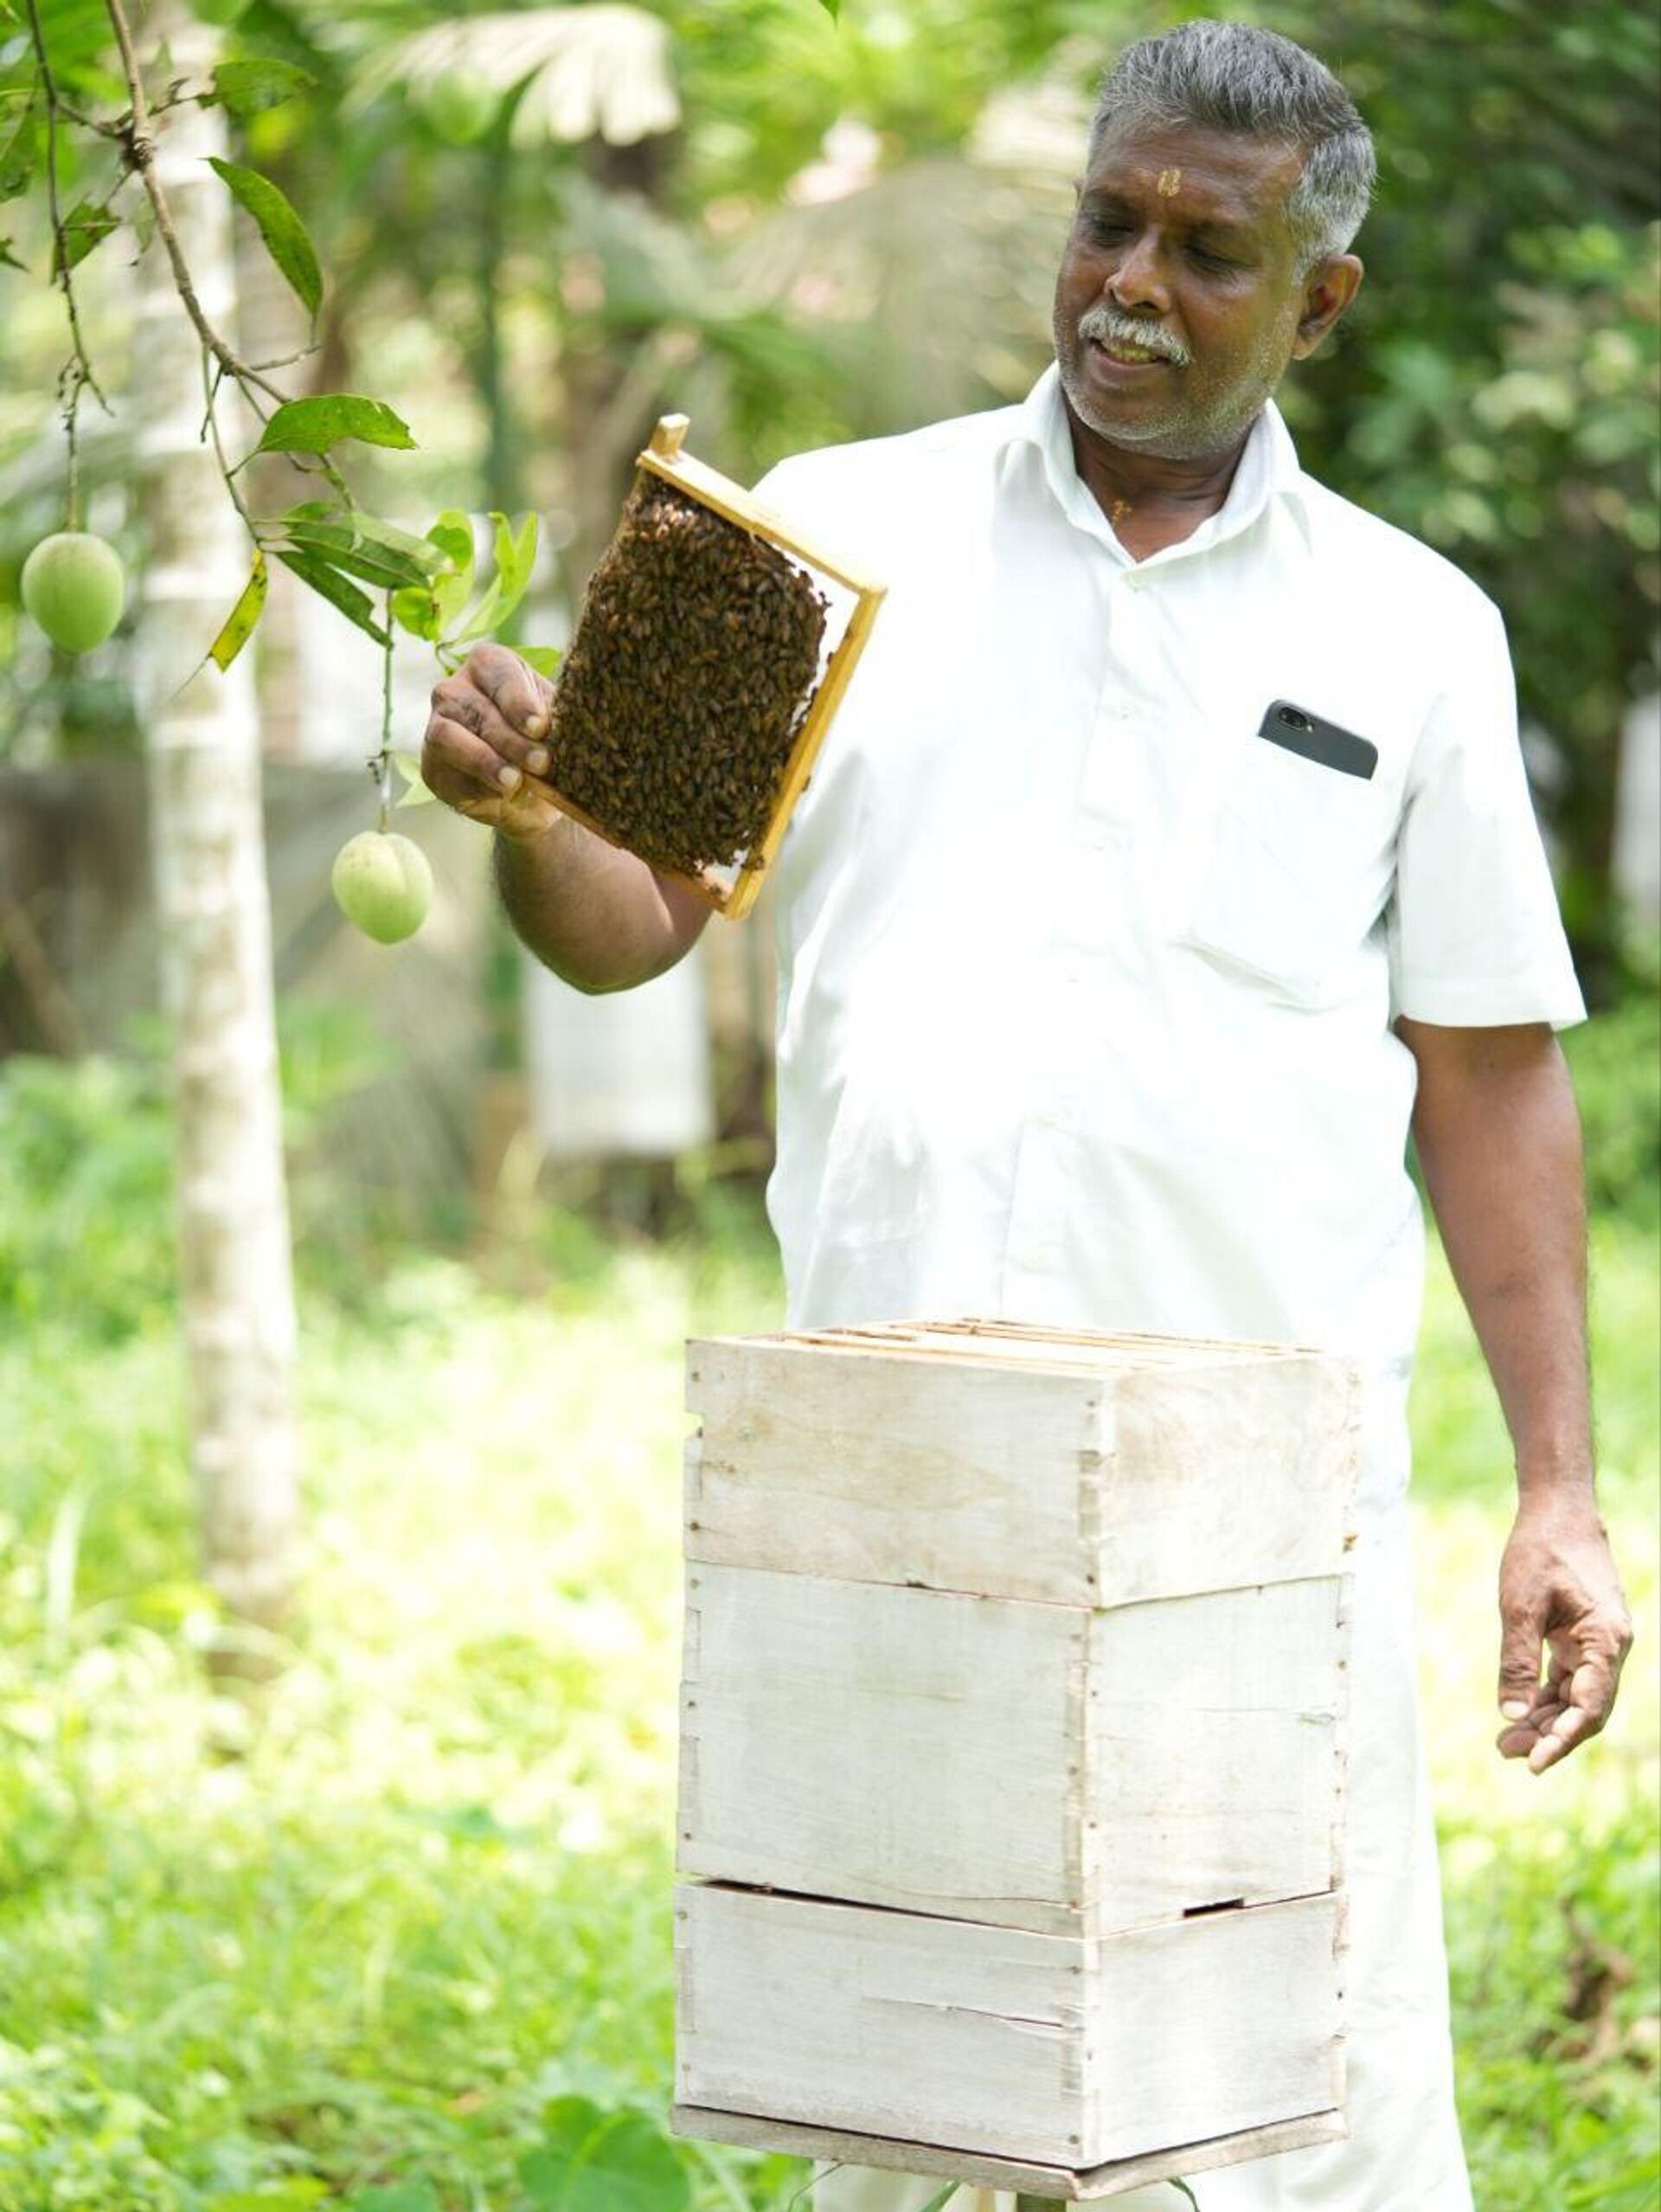 Sajayakumar M.R., a farmer and beekeeper, holding bee hive at his Bharath Bee Keeping Centre in Avanisserry area in Kerala state's Trissur district. - Sputnik India, 1920, 19.05.2023